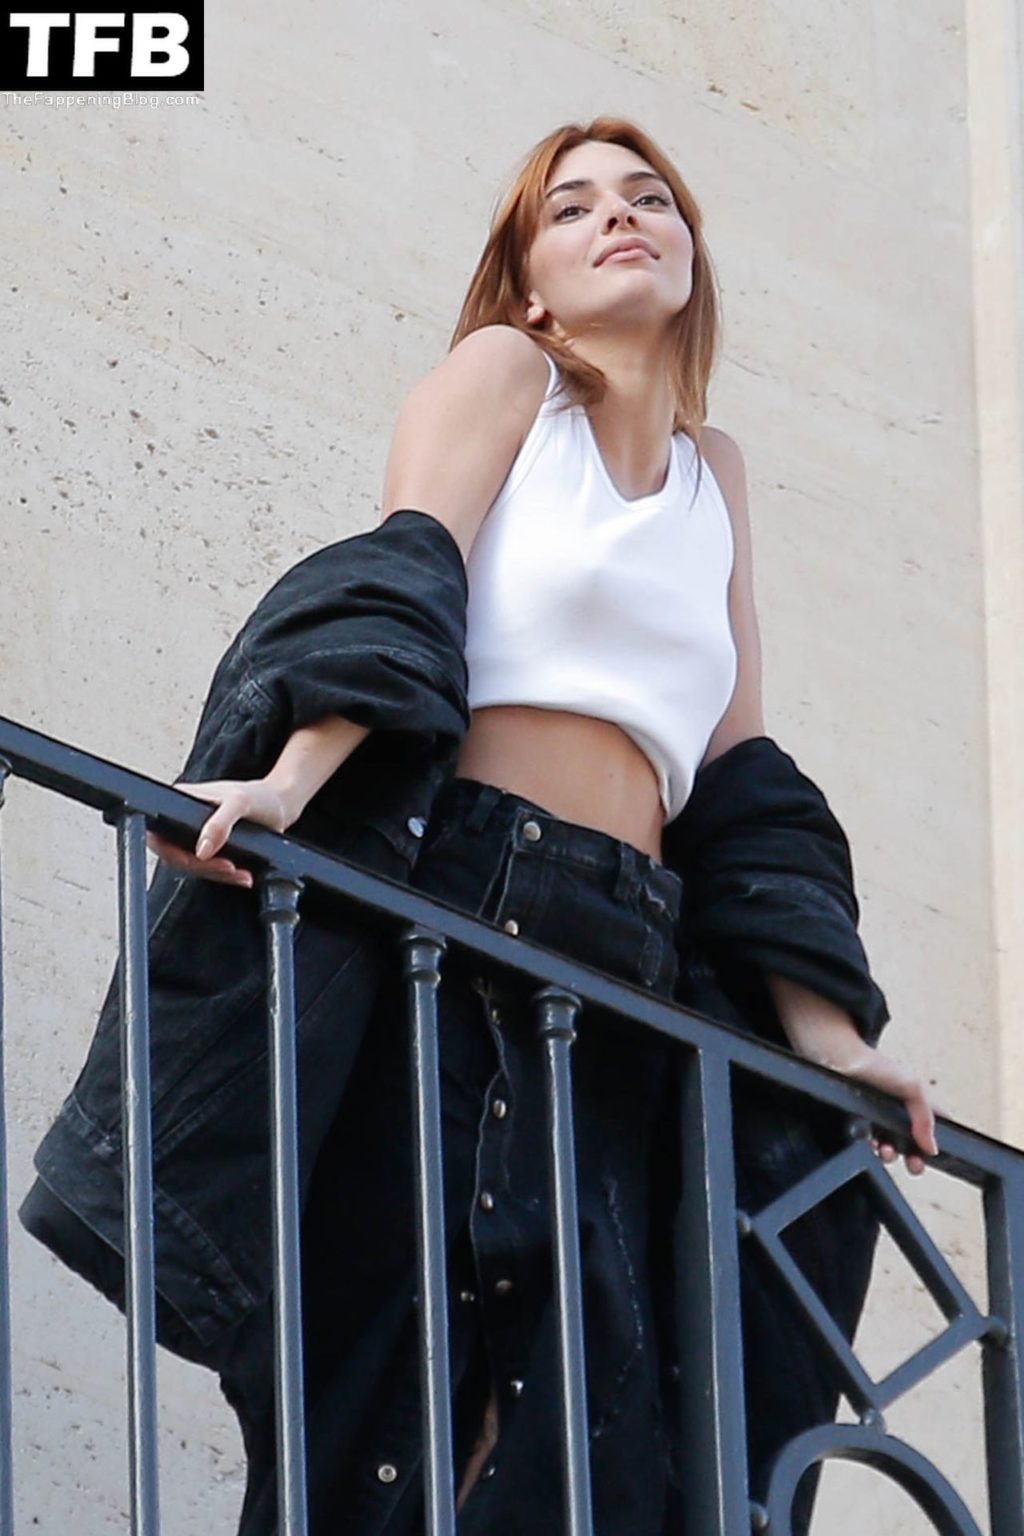 Kendall Jenner Braless The Fappening Blog 122 1024x1536 - Braless Kendall Jenner Poses in Paris (141 Photos)